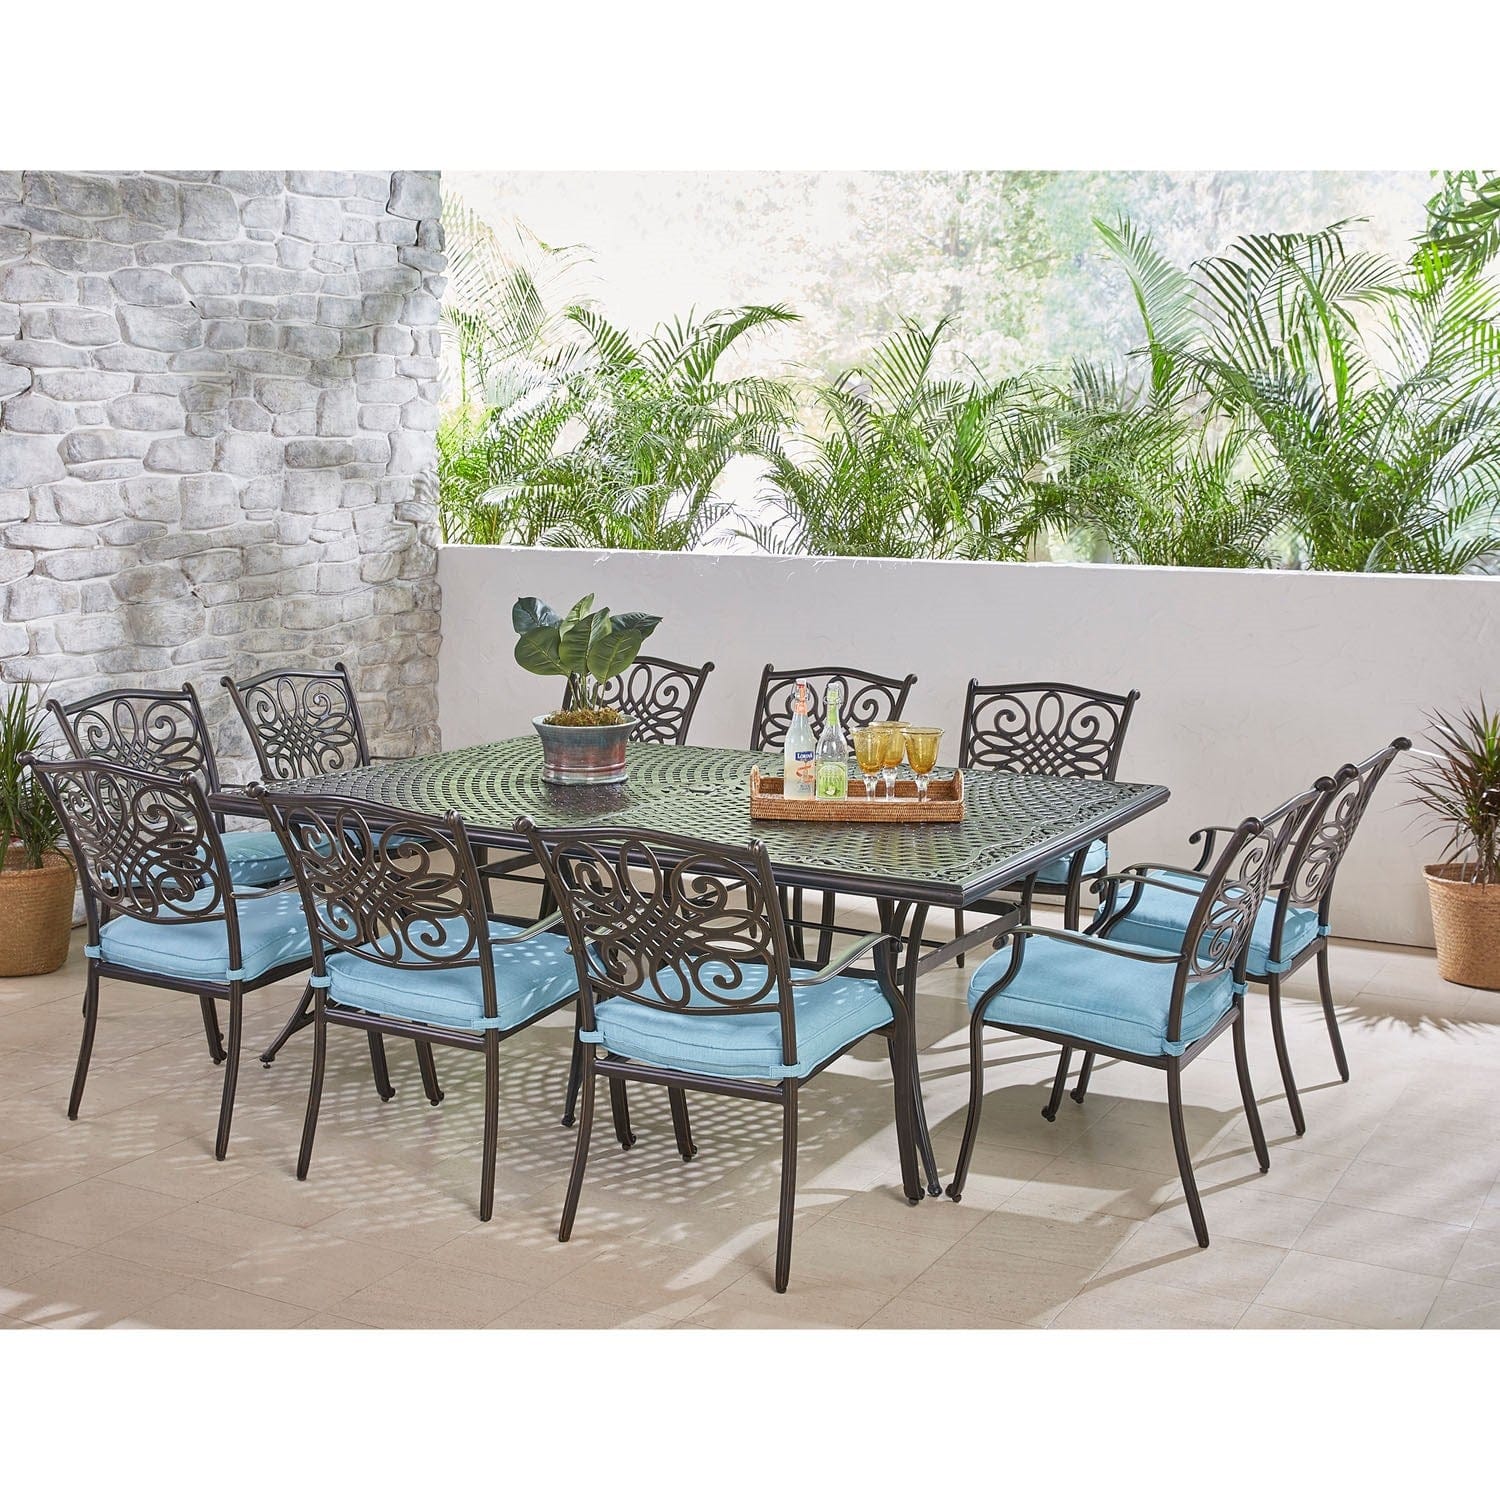 Hanover Outdoor Dining Set Hanover - Traditions 11-Piece Aluminum Outdoor Dining Set with Blue Cushions - TRADDN11PC-BLU